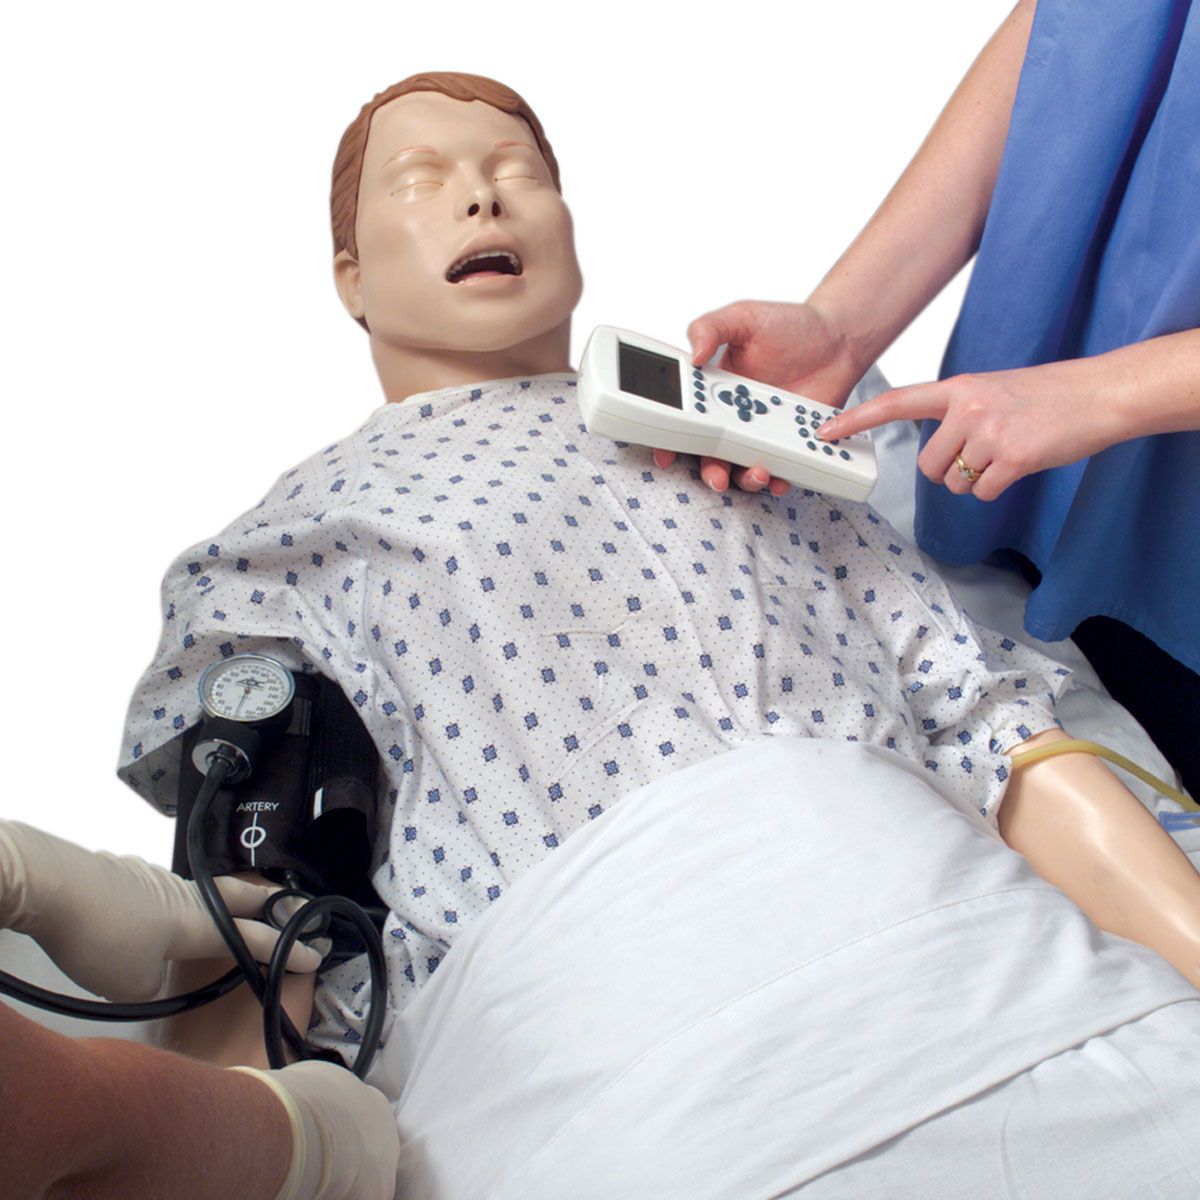 patient care manikins used in training